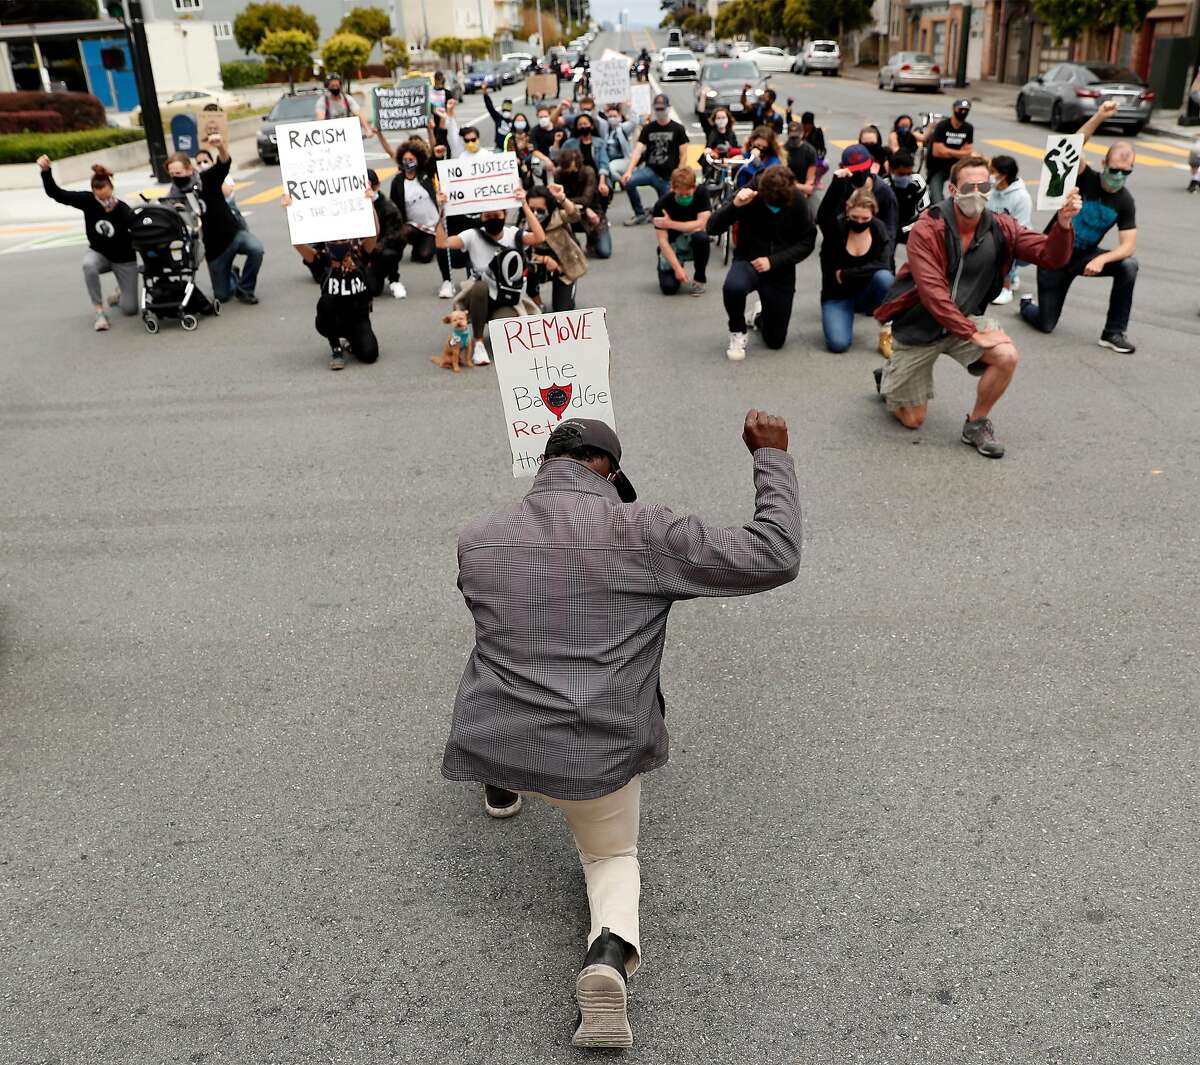 Every 28 Foundation's Don Poisson kneels in the middle of Turk Street as he leads a march from Wallenberg High School through neighborhoods to Richmond Police Station on 6th Avenue in San Francisco, Calif., on Sunday, July 19, 2020. The Police Commission has not voted down the new police budget yet. The Board of Supervisors has heard the city's voice and still have not made a definite move toward disbanding the police.